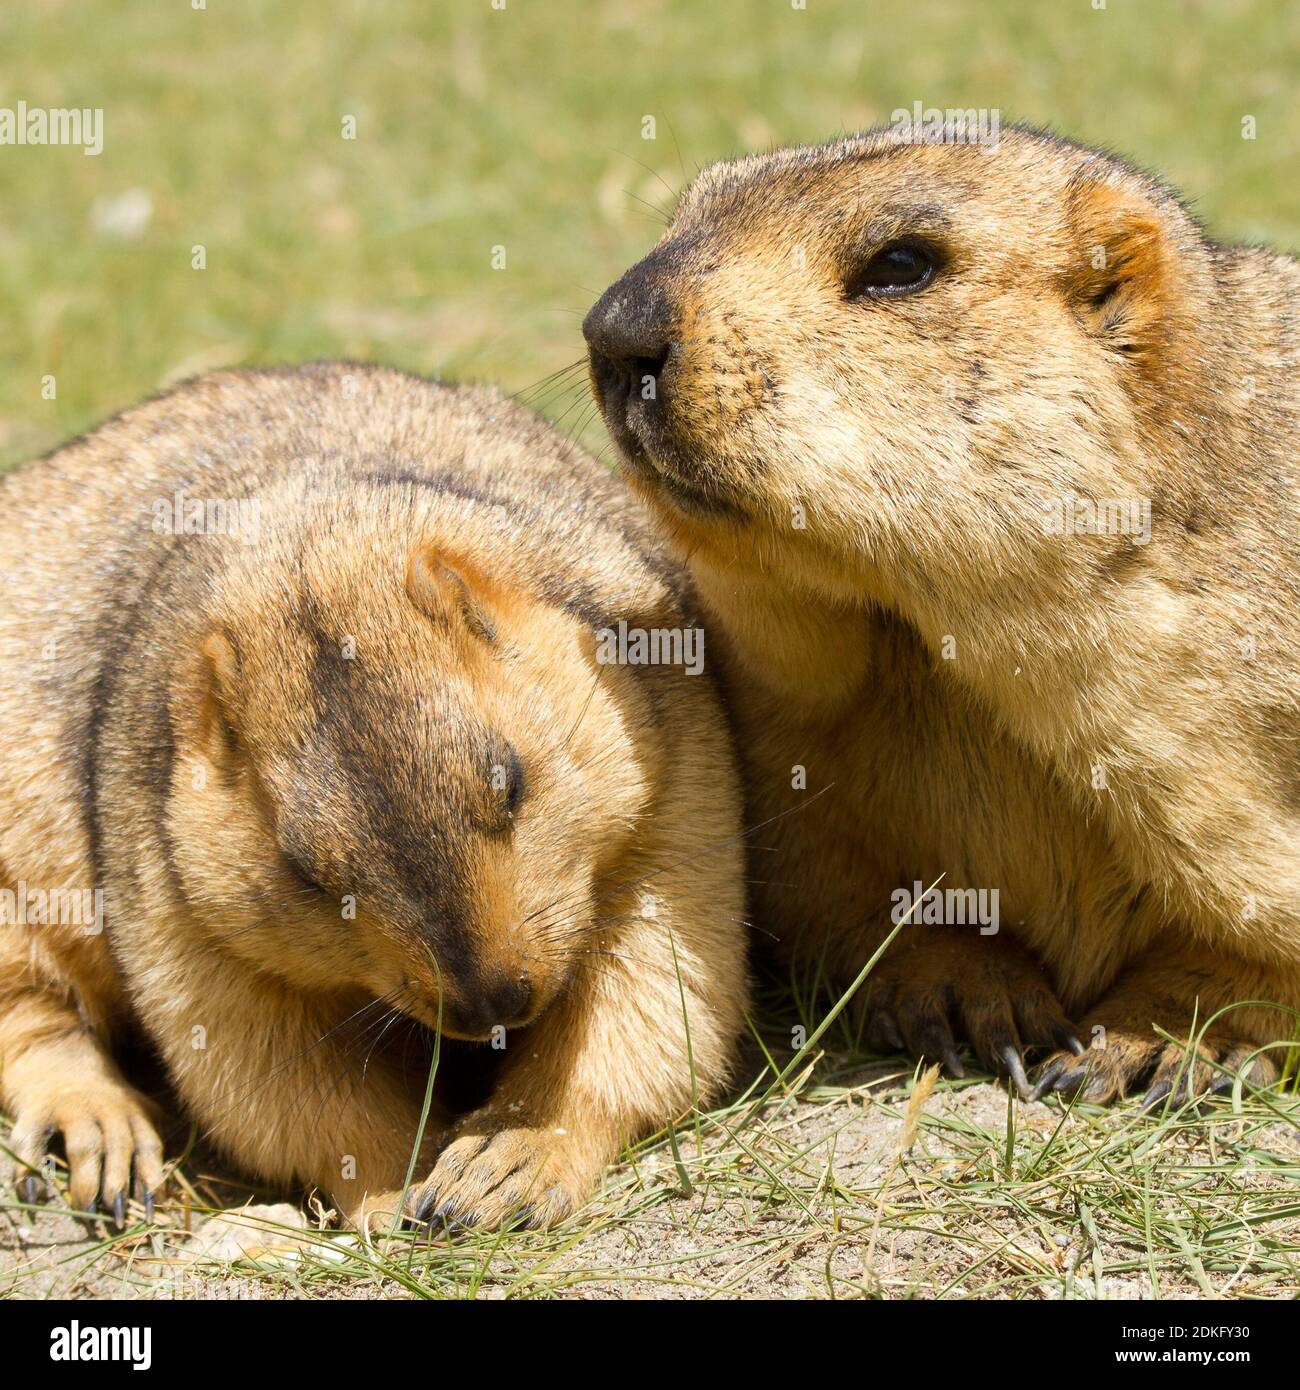 Couple of funny surprising himalayan marmots (groundhogs) on the green meadow in the vicinity of Pangong Tso Lake (Himalayas, Ladakh, India) Stock Photo